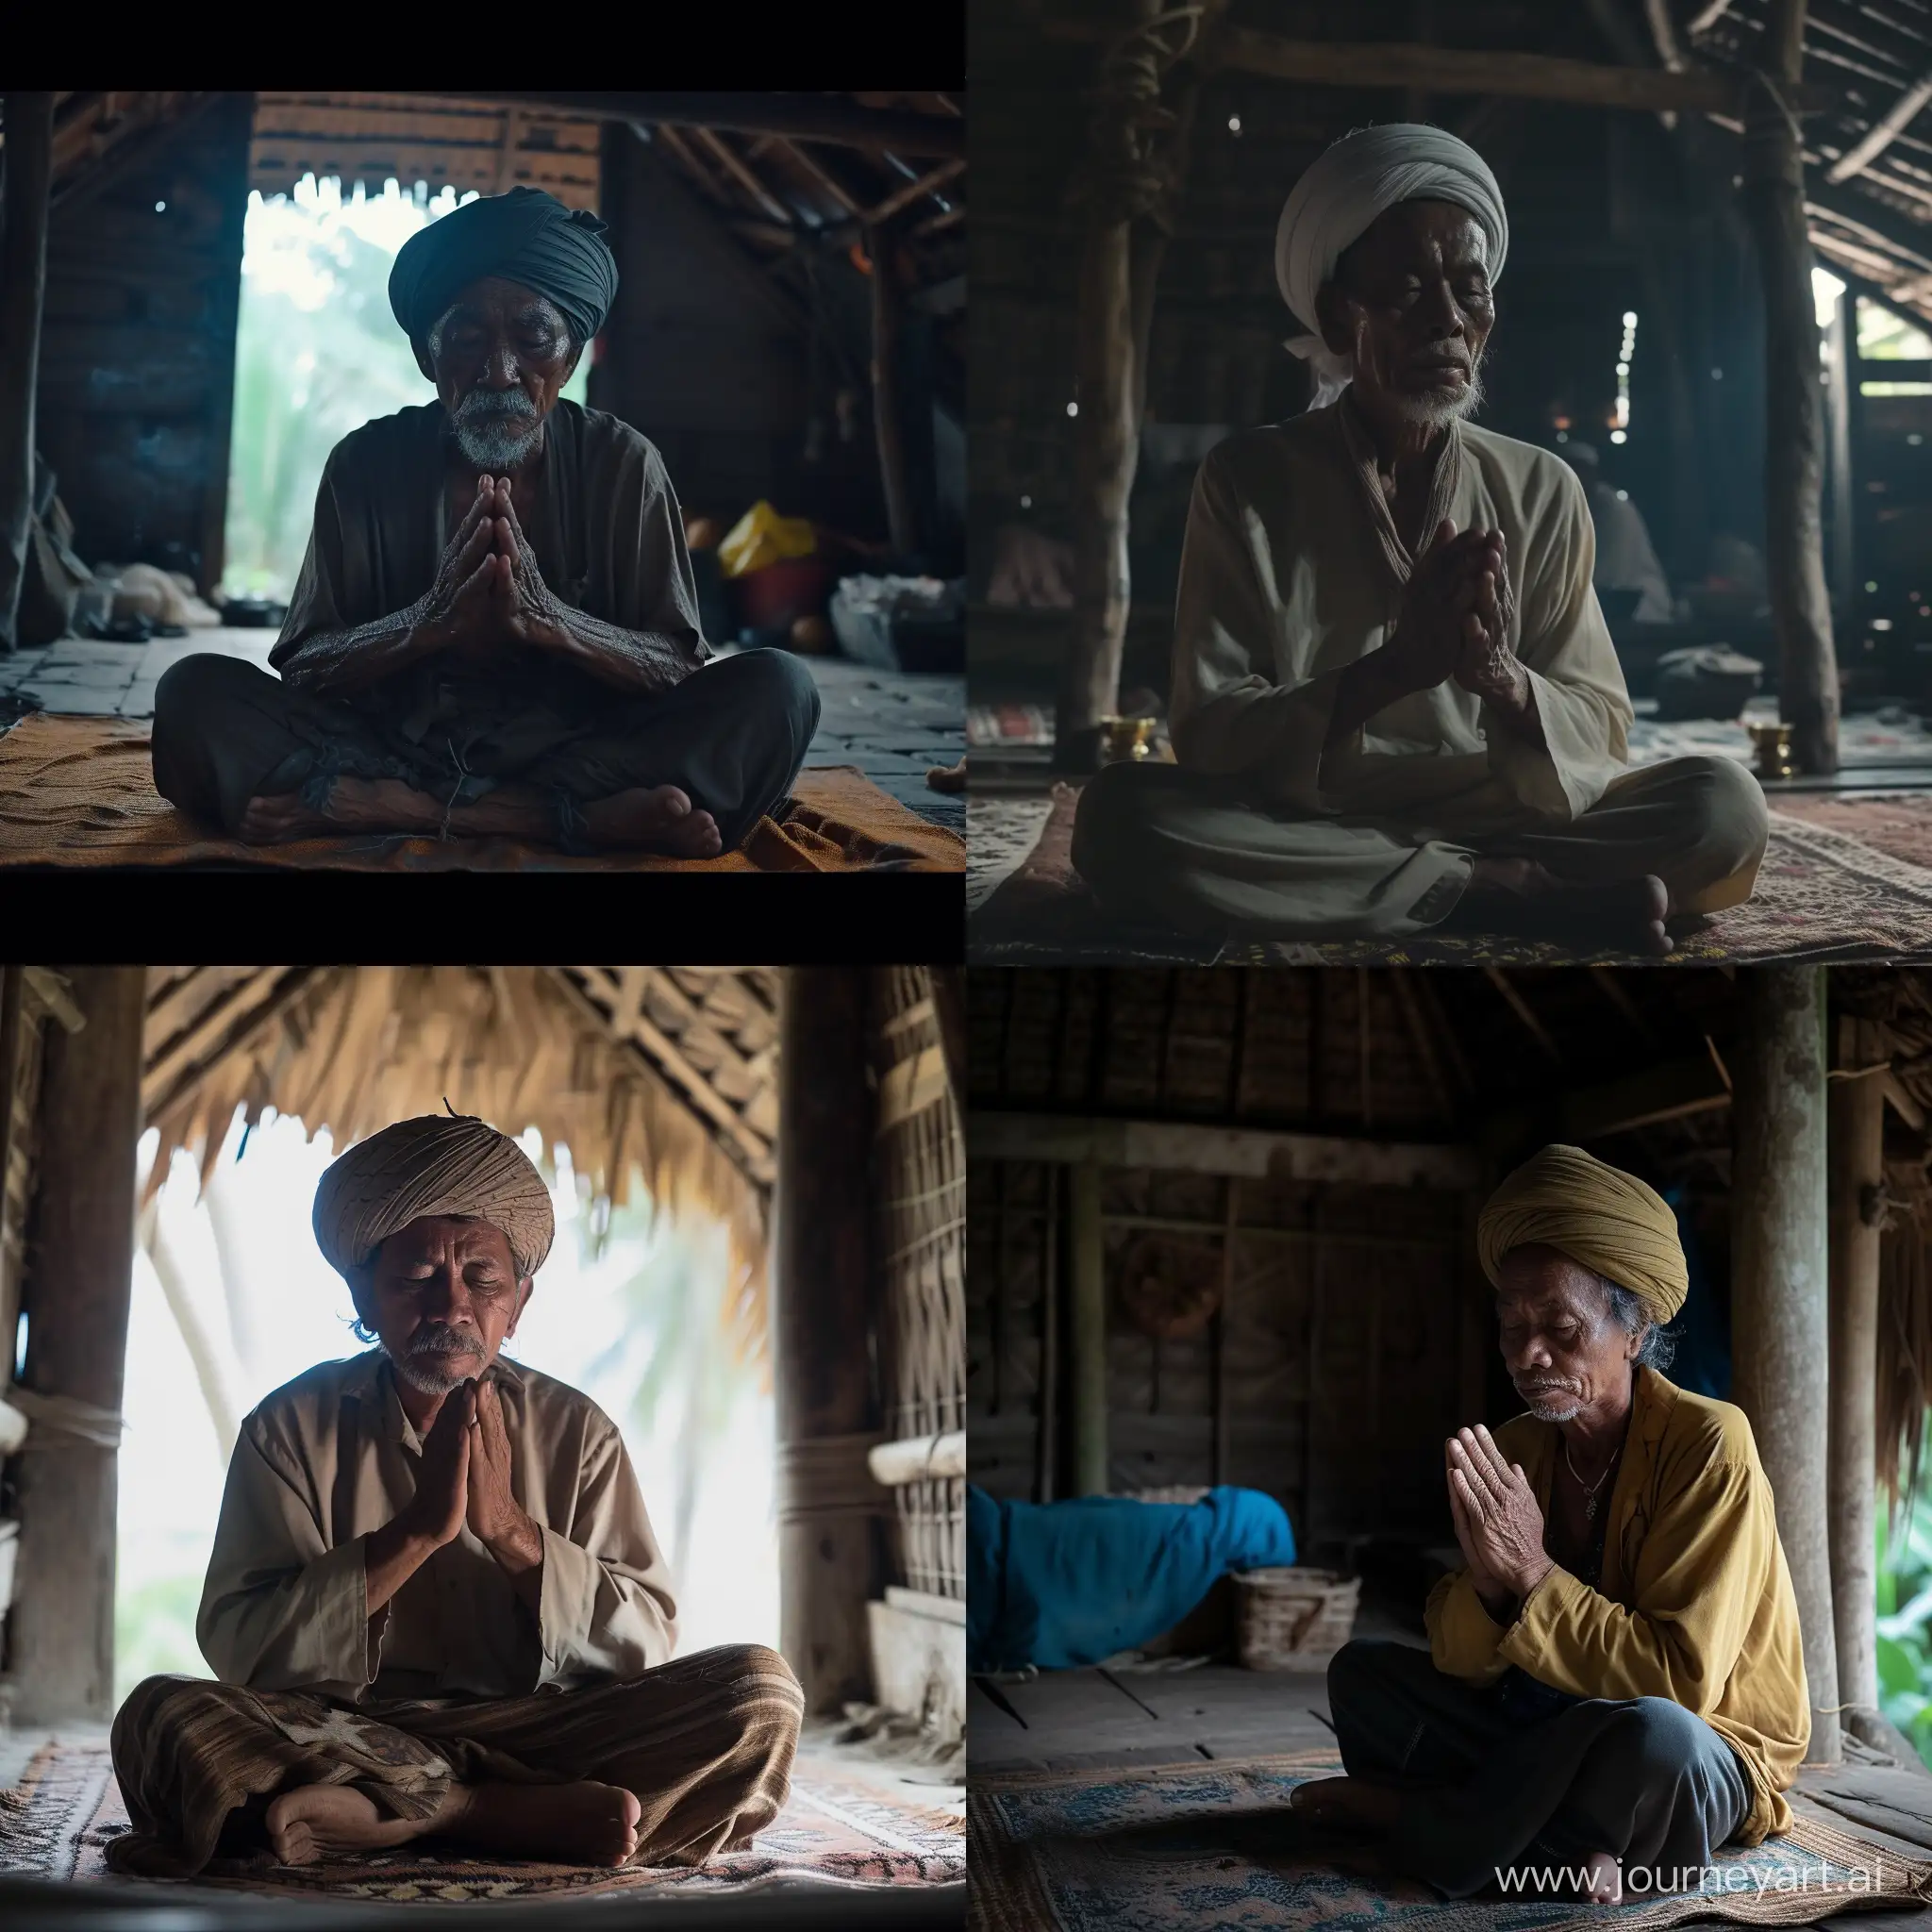 Devout-Indonesian-Muslim-Man-Performing-Dhikr-in-Isolated-Hut-Horror-Movie-Scene